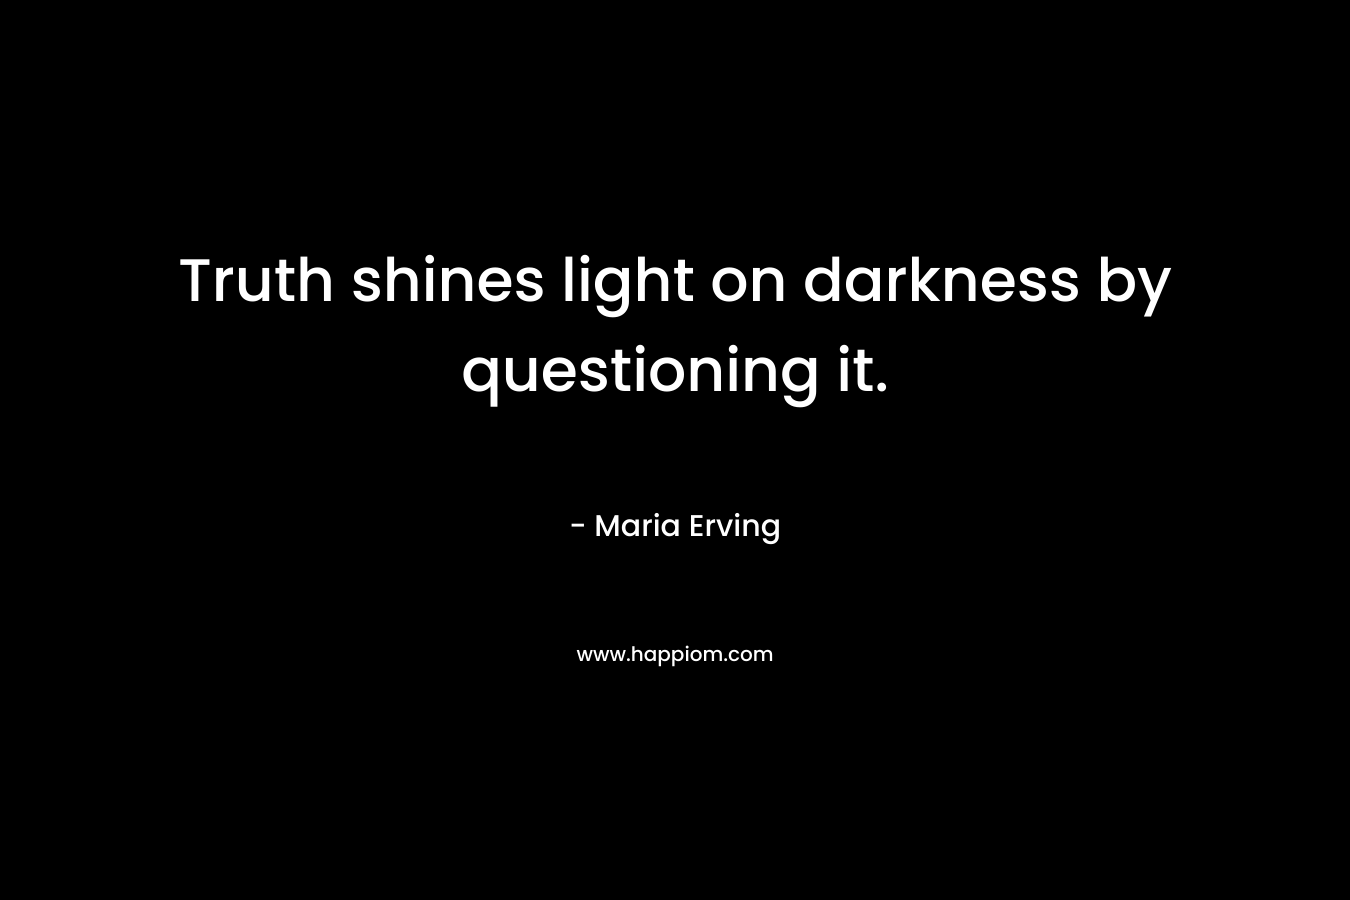 Truth shines light on darkness by questioning it.